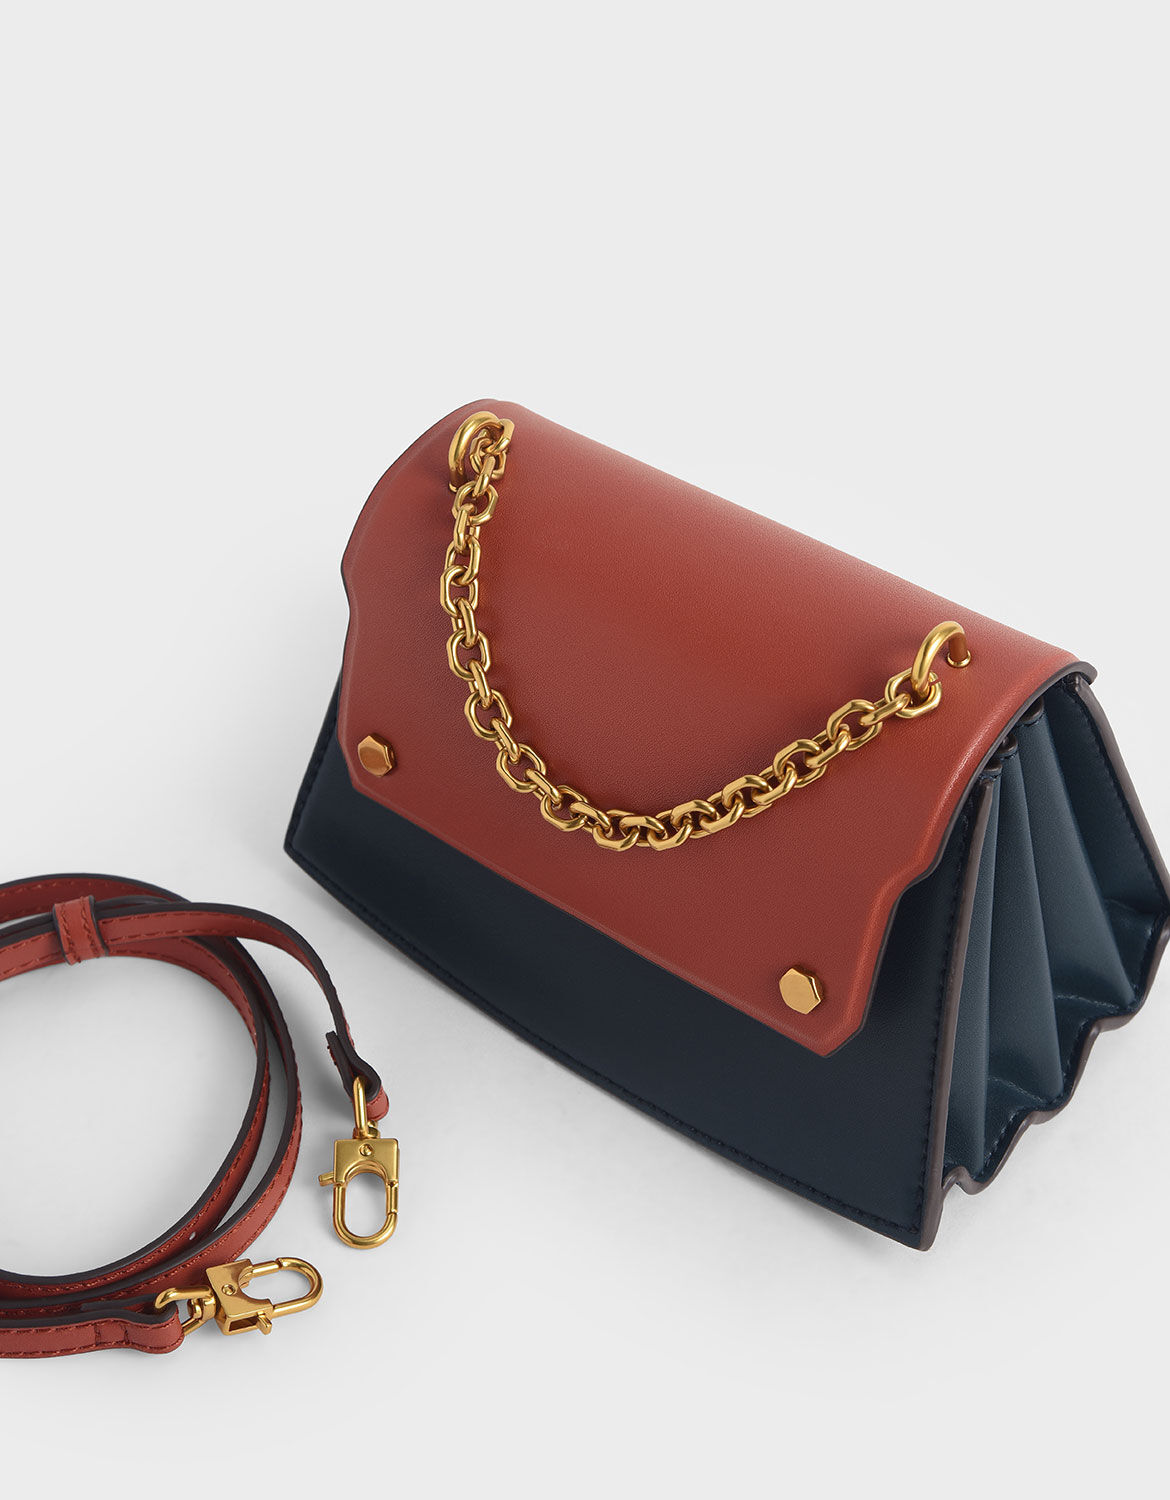 Shop Women’s Bags | Exclusive Styles | CHARLES & KEITH International